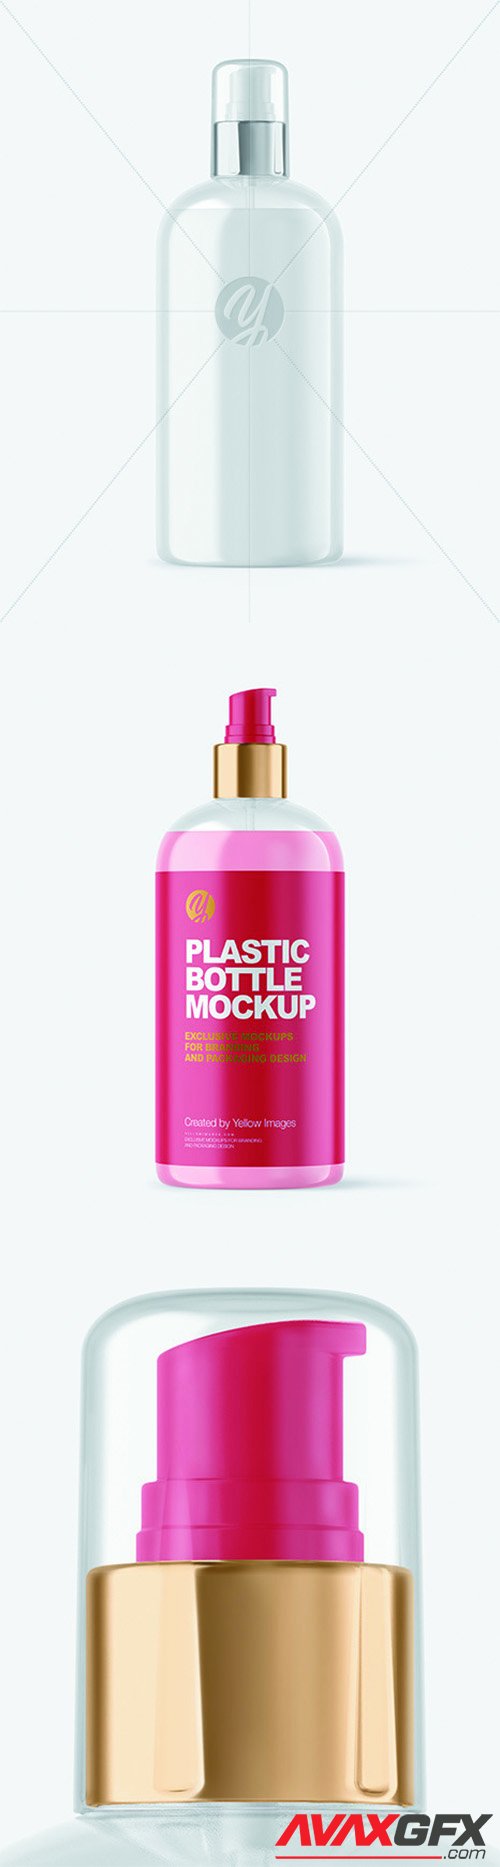 Clear Liquid Soap Bottle with Pump Mockup 66360 » AVAXGFX - All